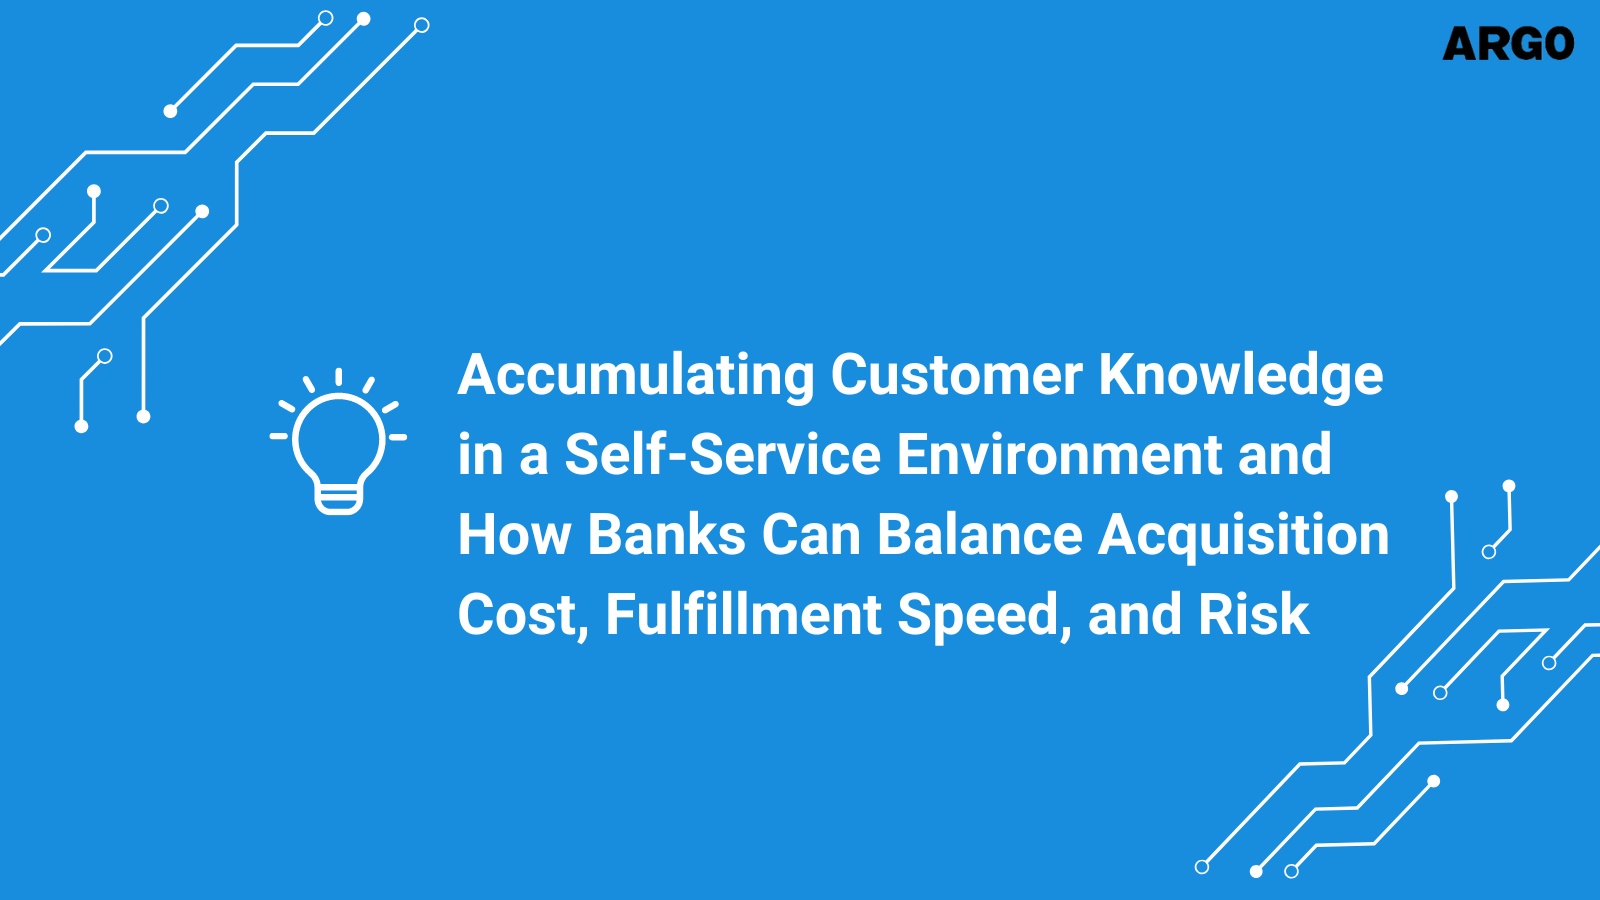 Accumulating Customer Knowledge in a Self-Service Environment and How Banks Can Balance Acquisition Cost, Fulfillment Speed, and Risk